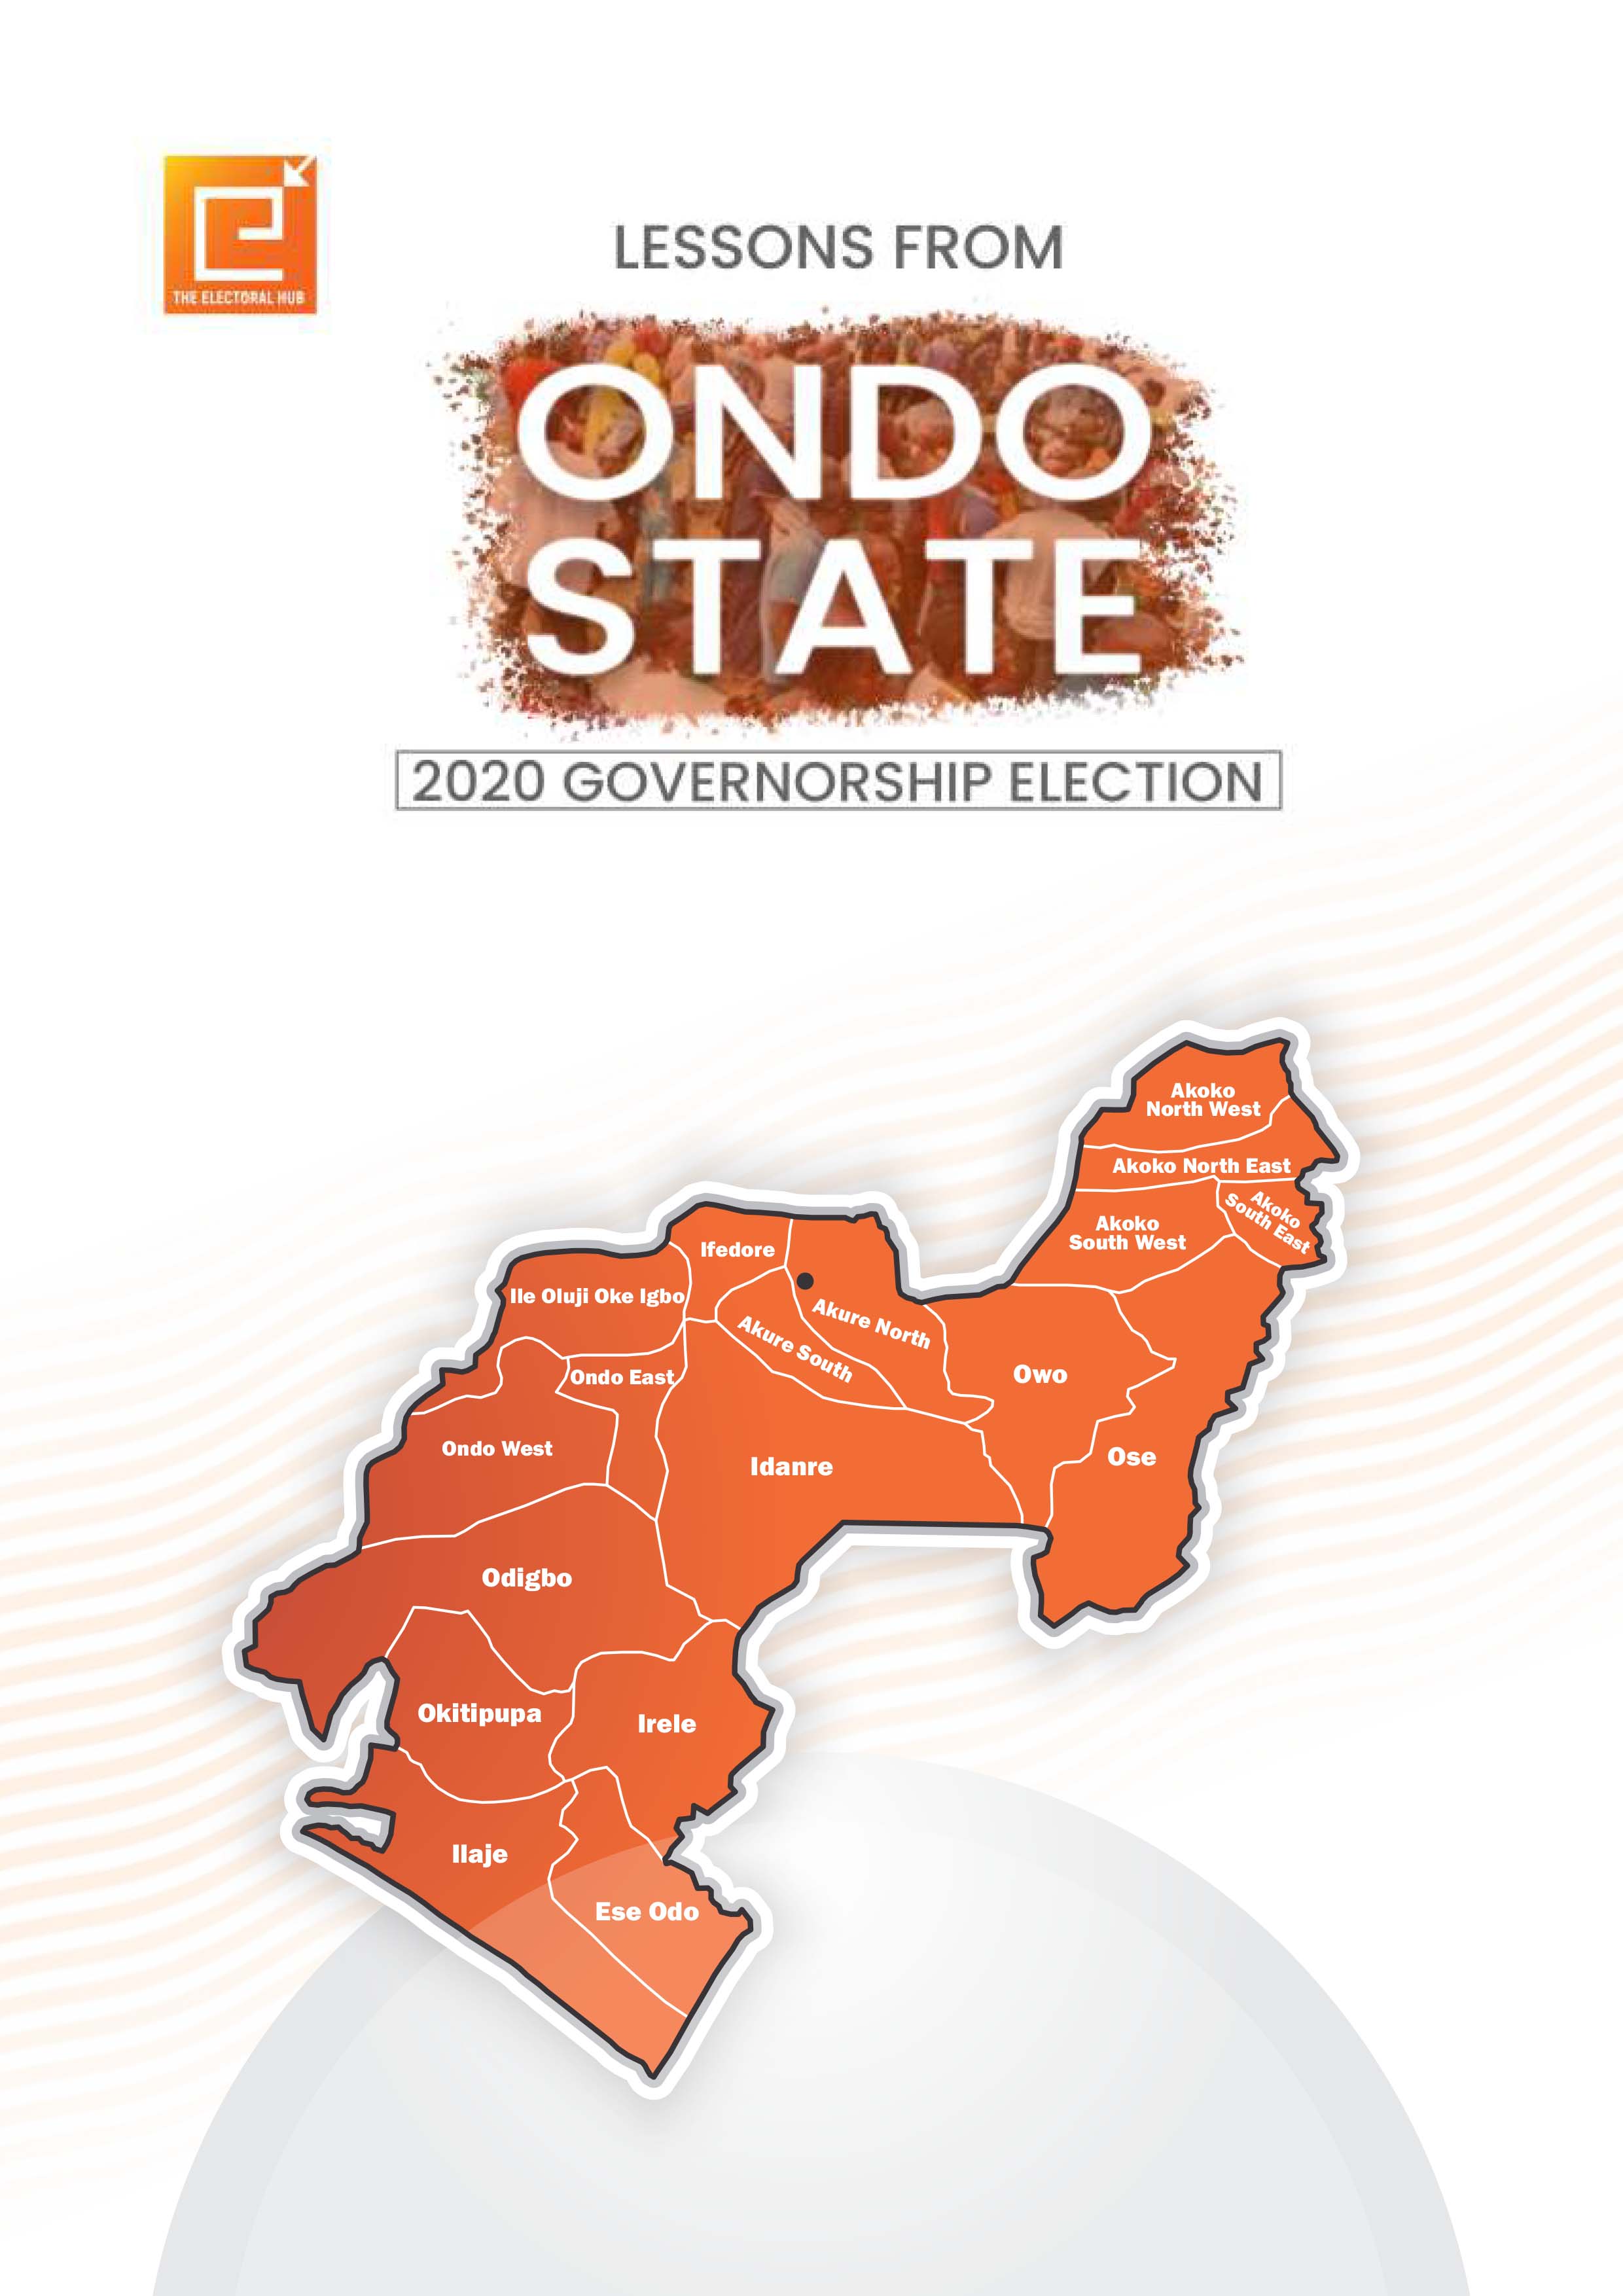 Lessons from Ondo State 2020 Governorship Election